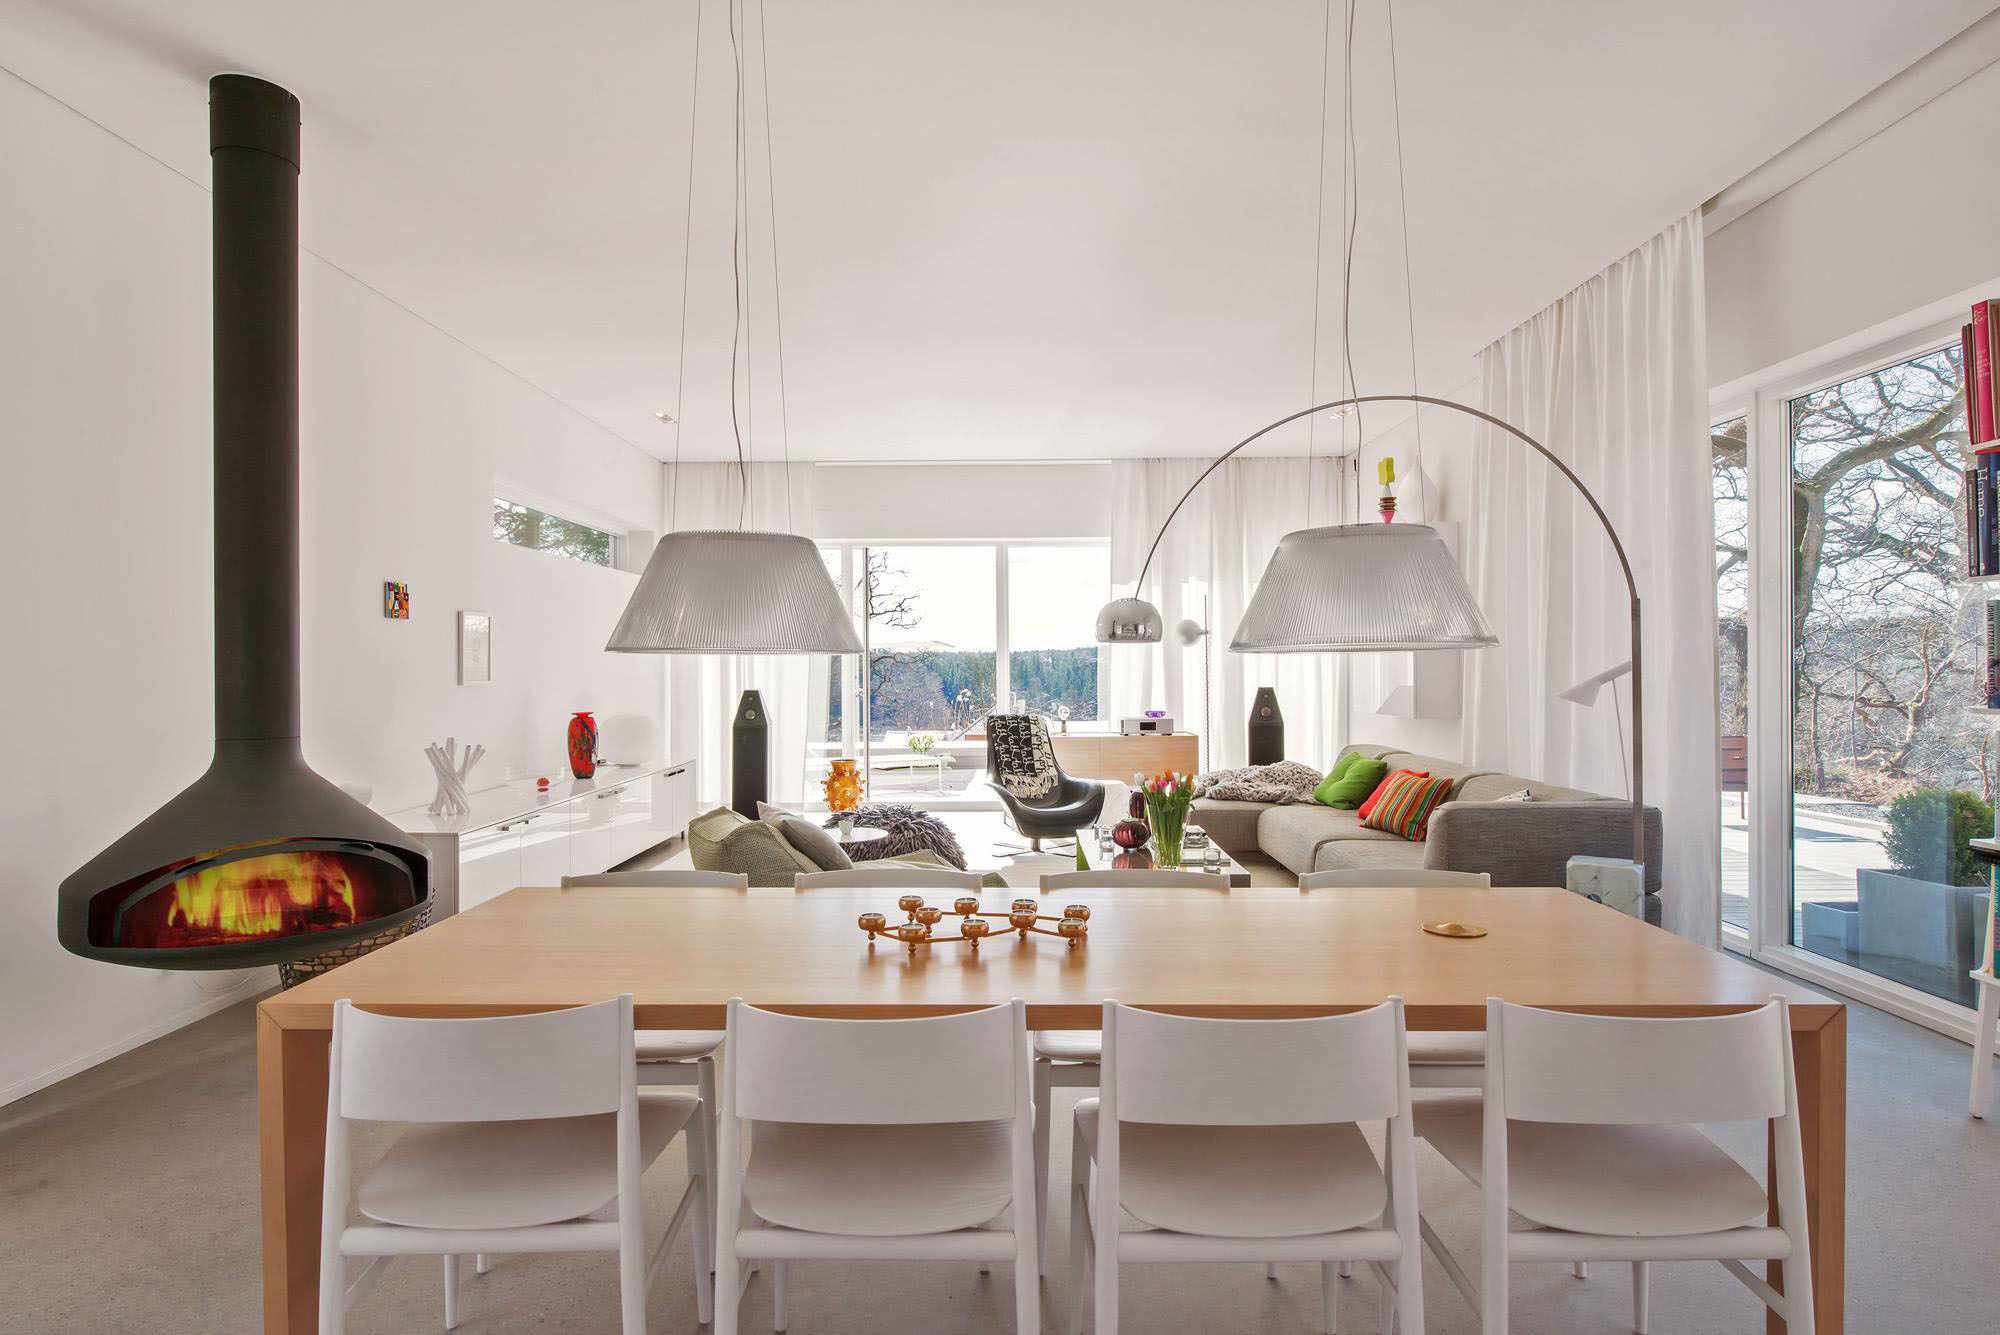 Modern Villa Unitary Open Modern Villa Near Stockholm Unitary Room Idea Functions As Dining And Living Room Painted In White Dream Homes Stunningly Beautiful Villa Decorated In Modern Scandinavian Style